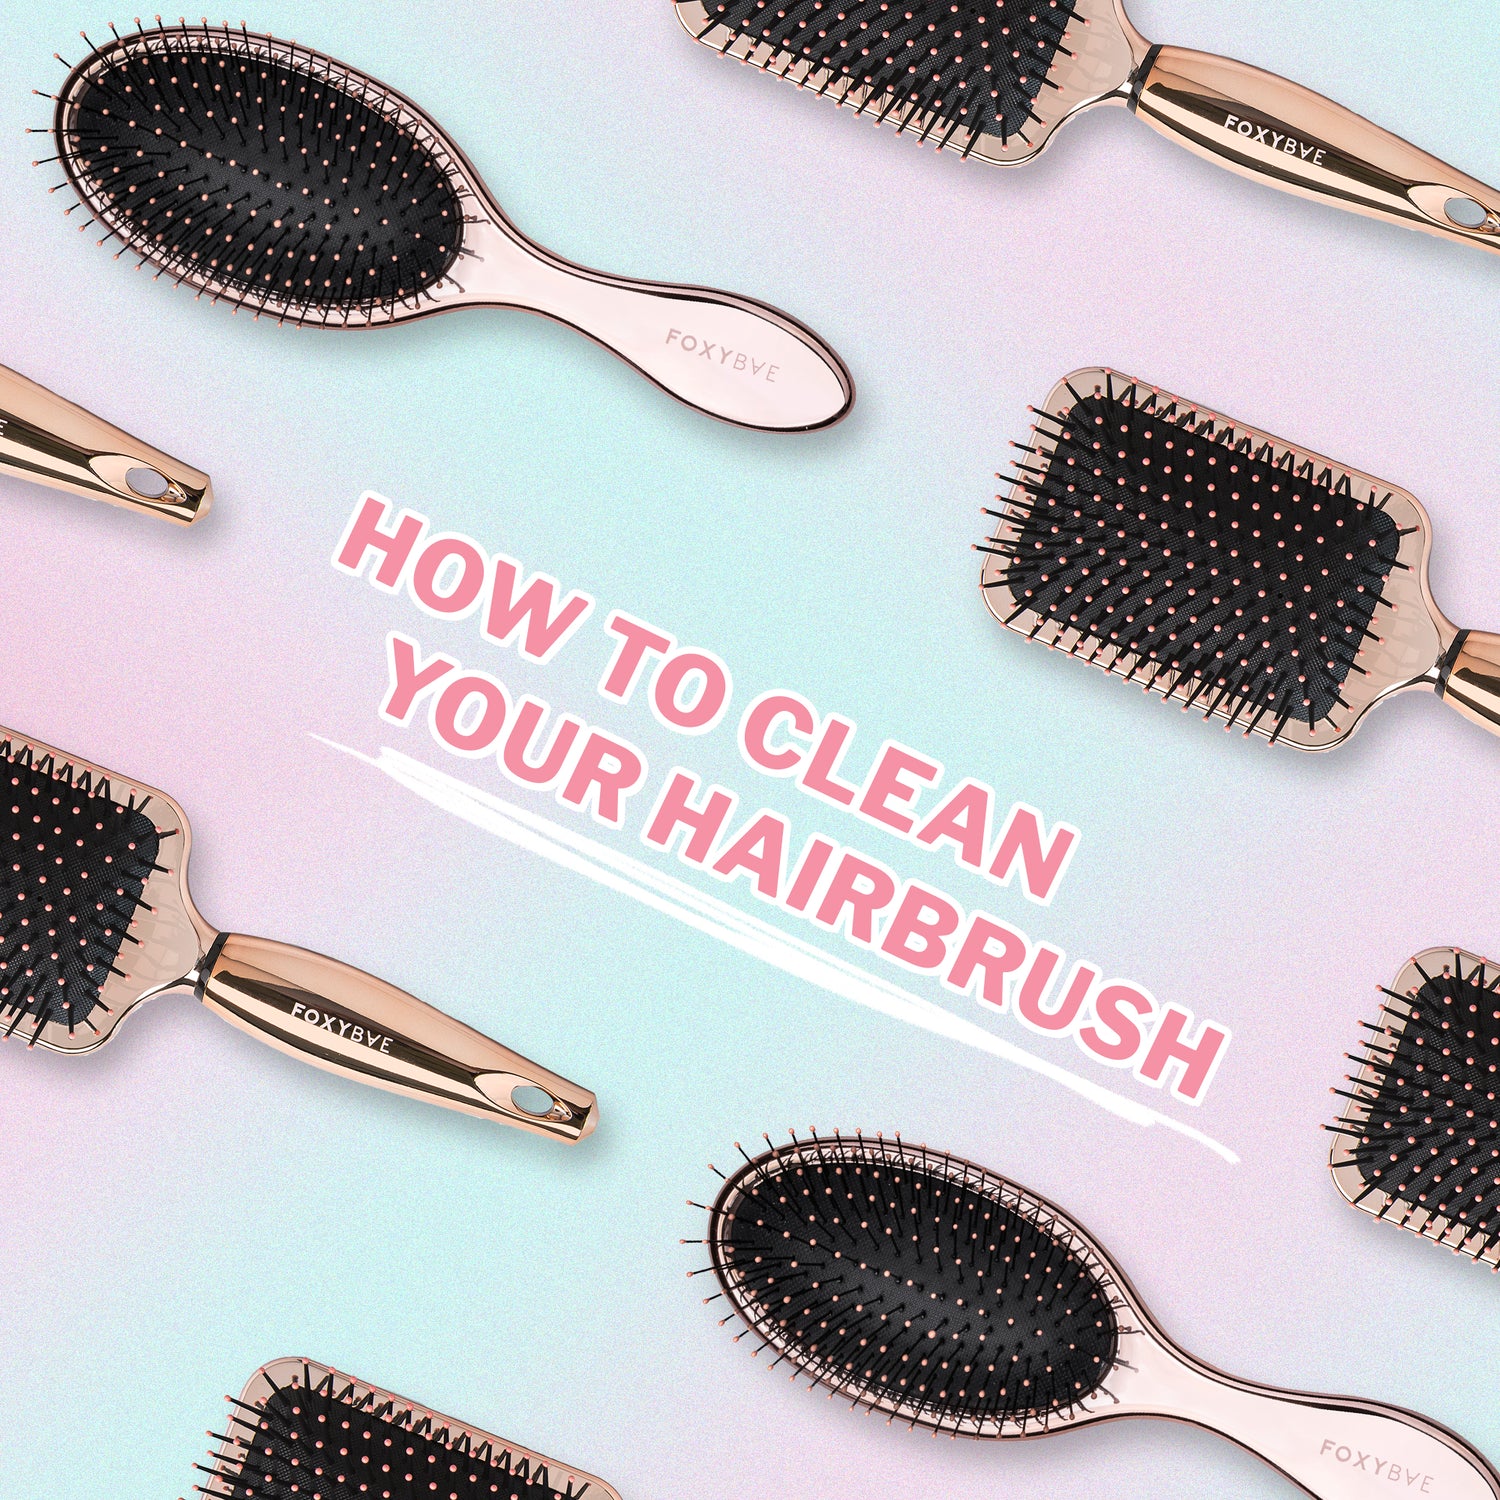 How To Clean Your Hairbrush (and How Often) featured image